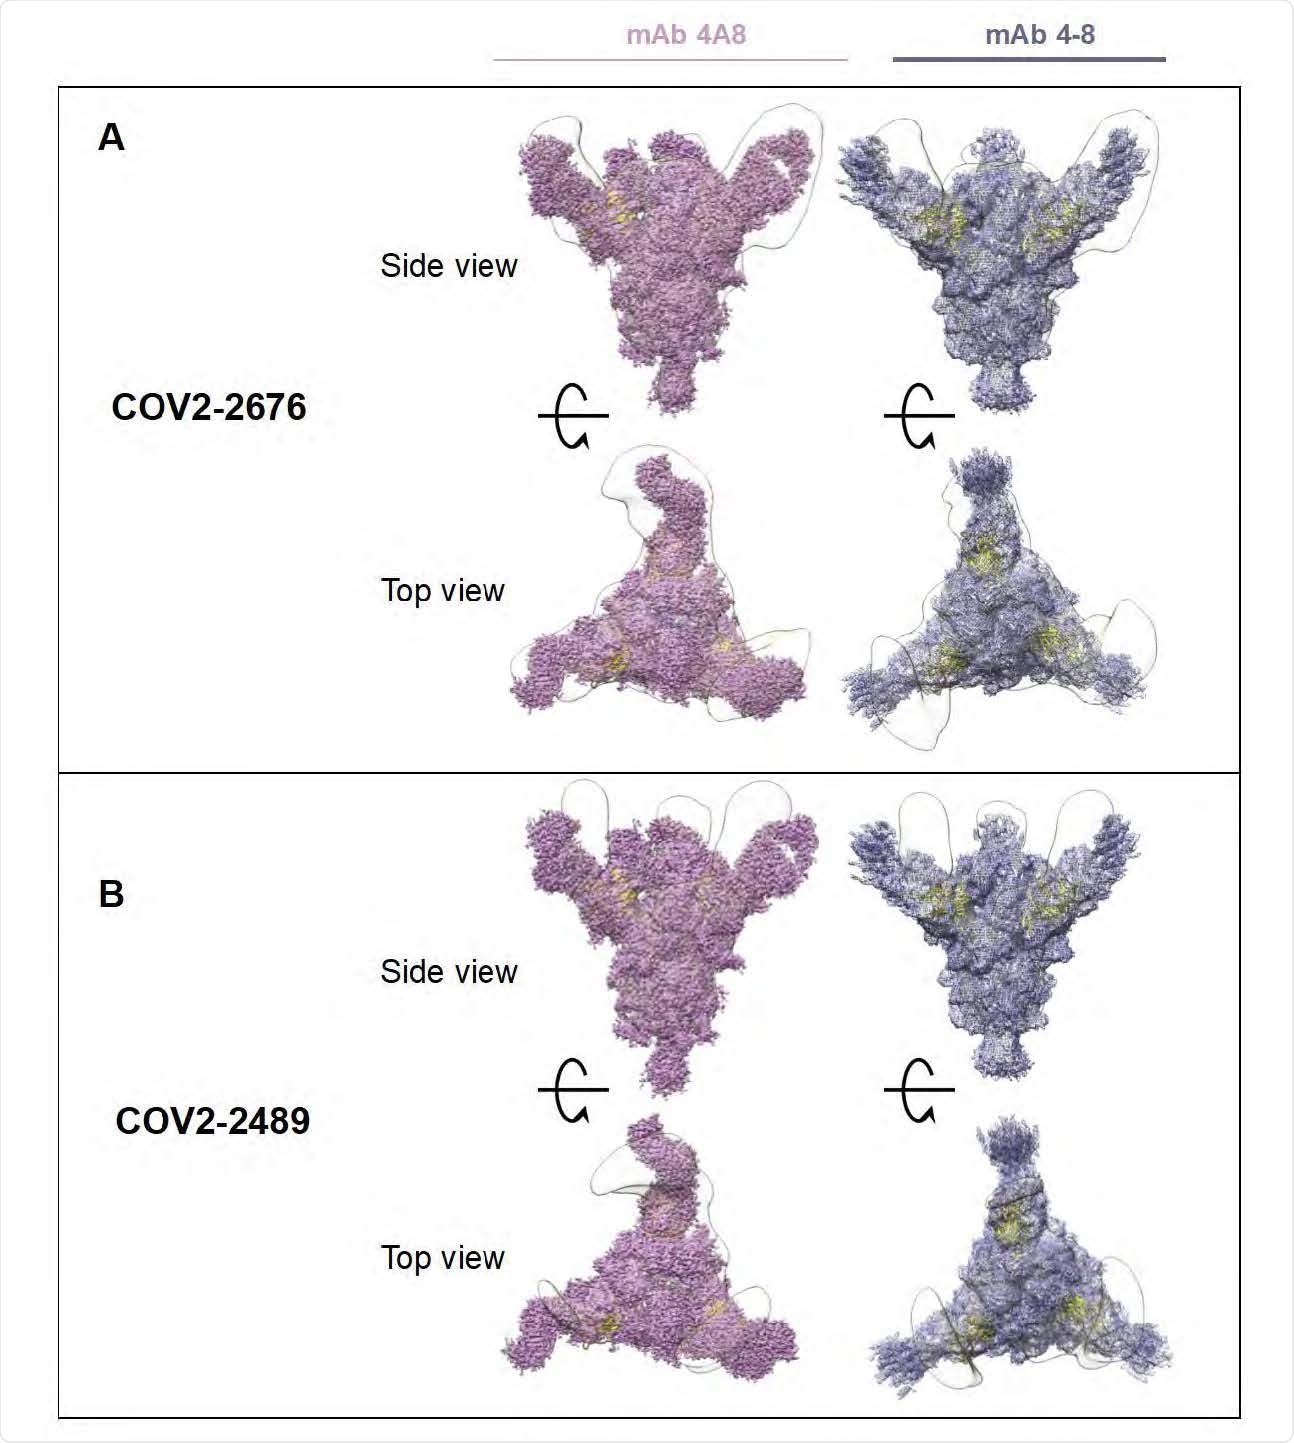 Superimposed Fab-Spike negative stain EM. A) COV2-2676 with mAb on the top is side view 4A8 (left), mAb 4-8 (right) and bottom is top view of the same. B) COV2-2489 with mAb on the top is side view 4A8 (left), mAb 4-8 (right) and bottom is top view of the same.